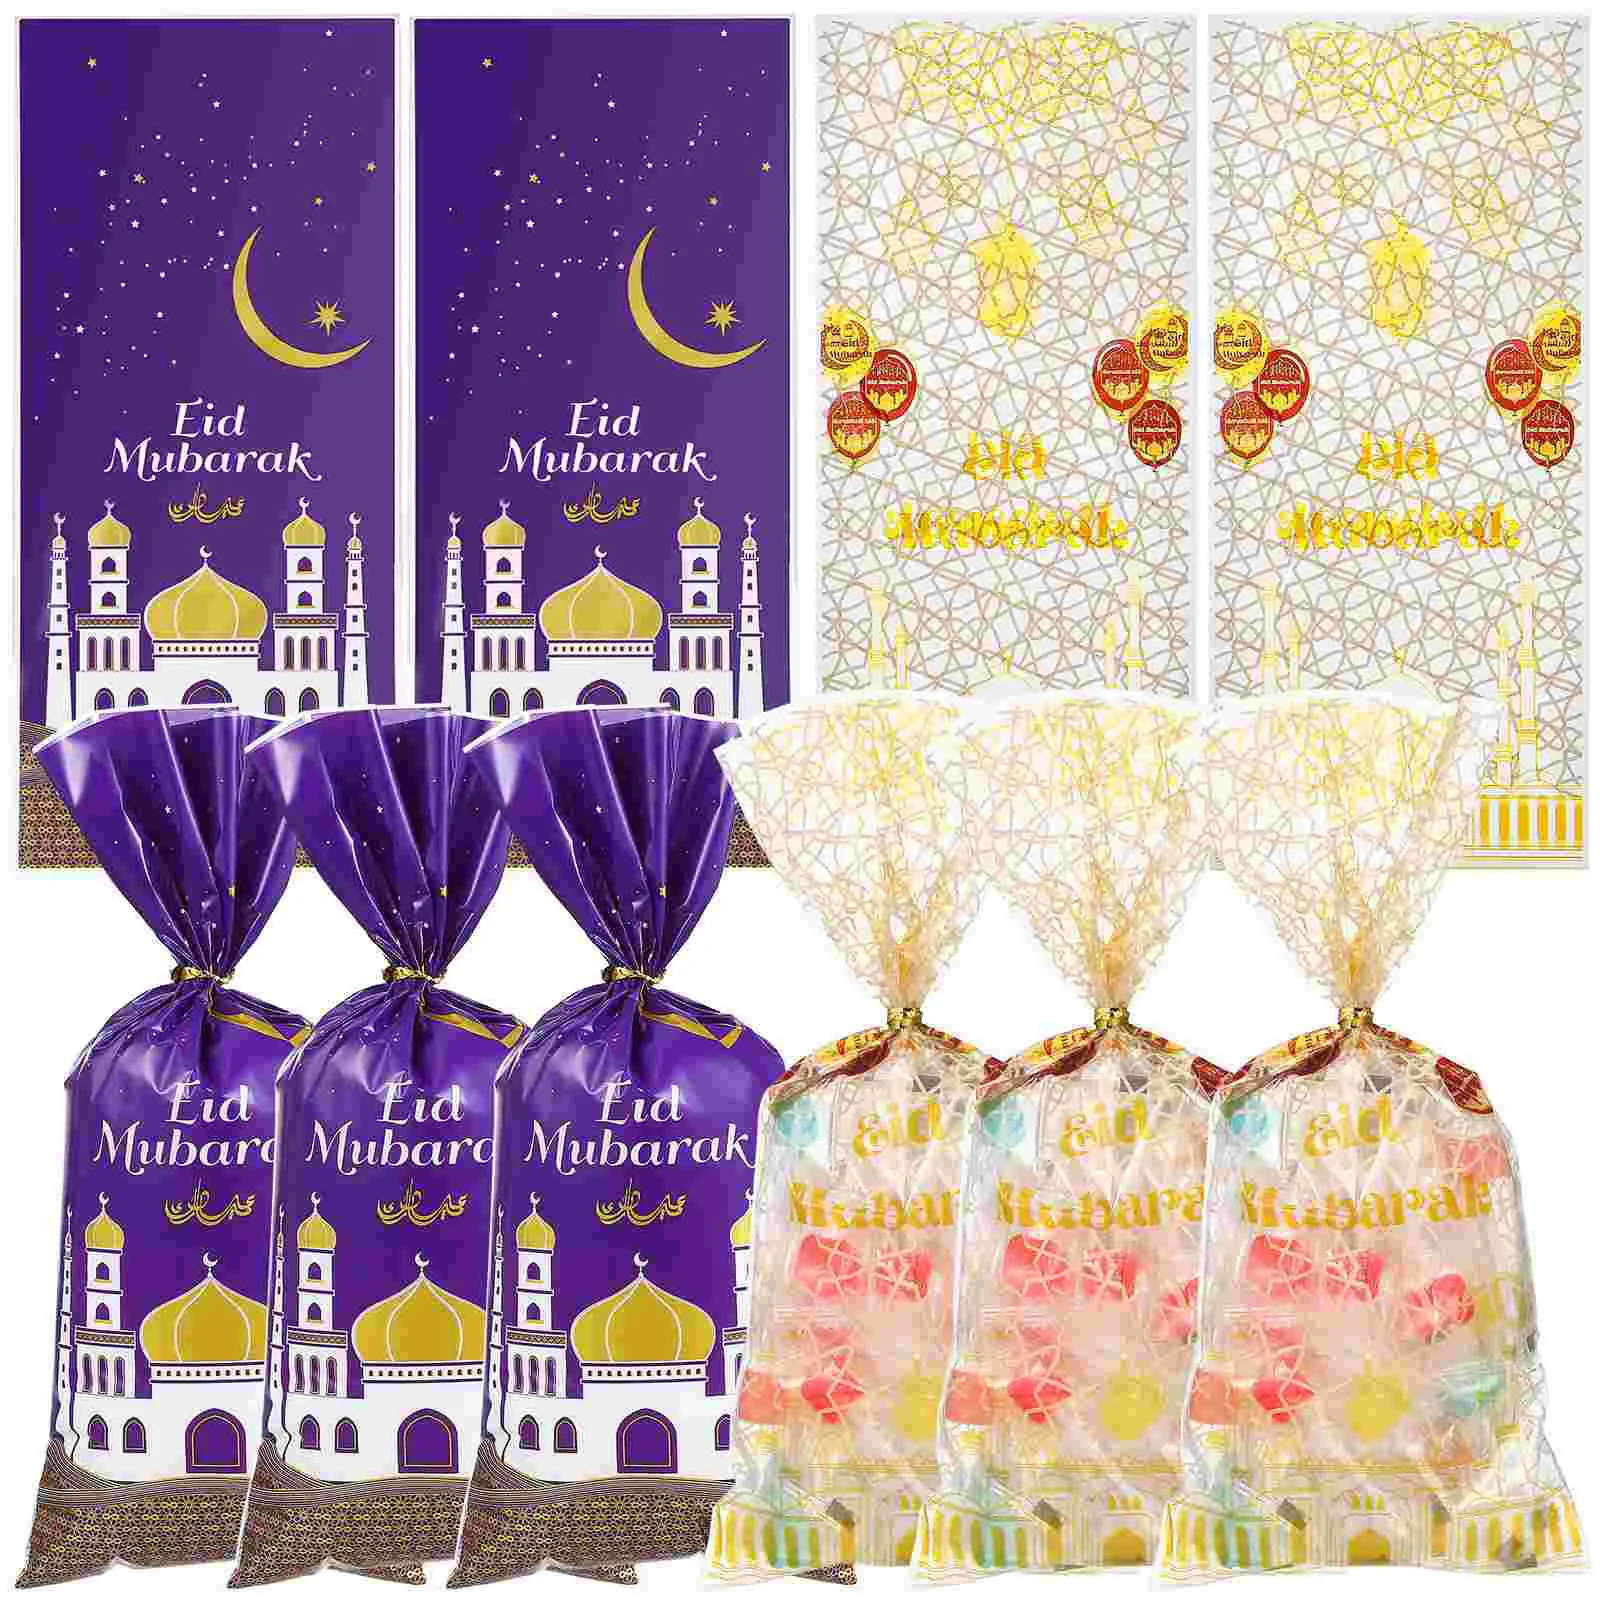 

100 Pcs Eid Gift Bag Candy Bags Goodies Clear Poly Chocolate Cookie Opp Cookies Storage Party Child Wedding Favors